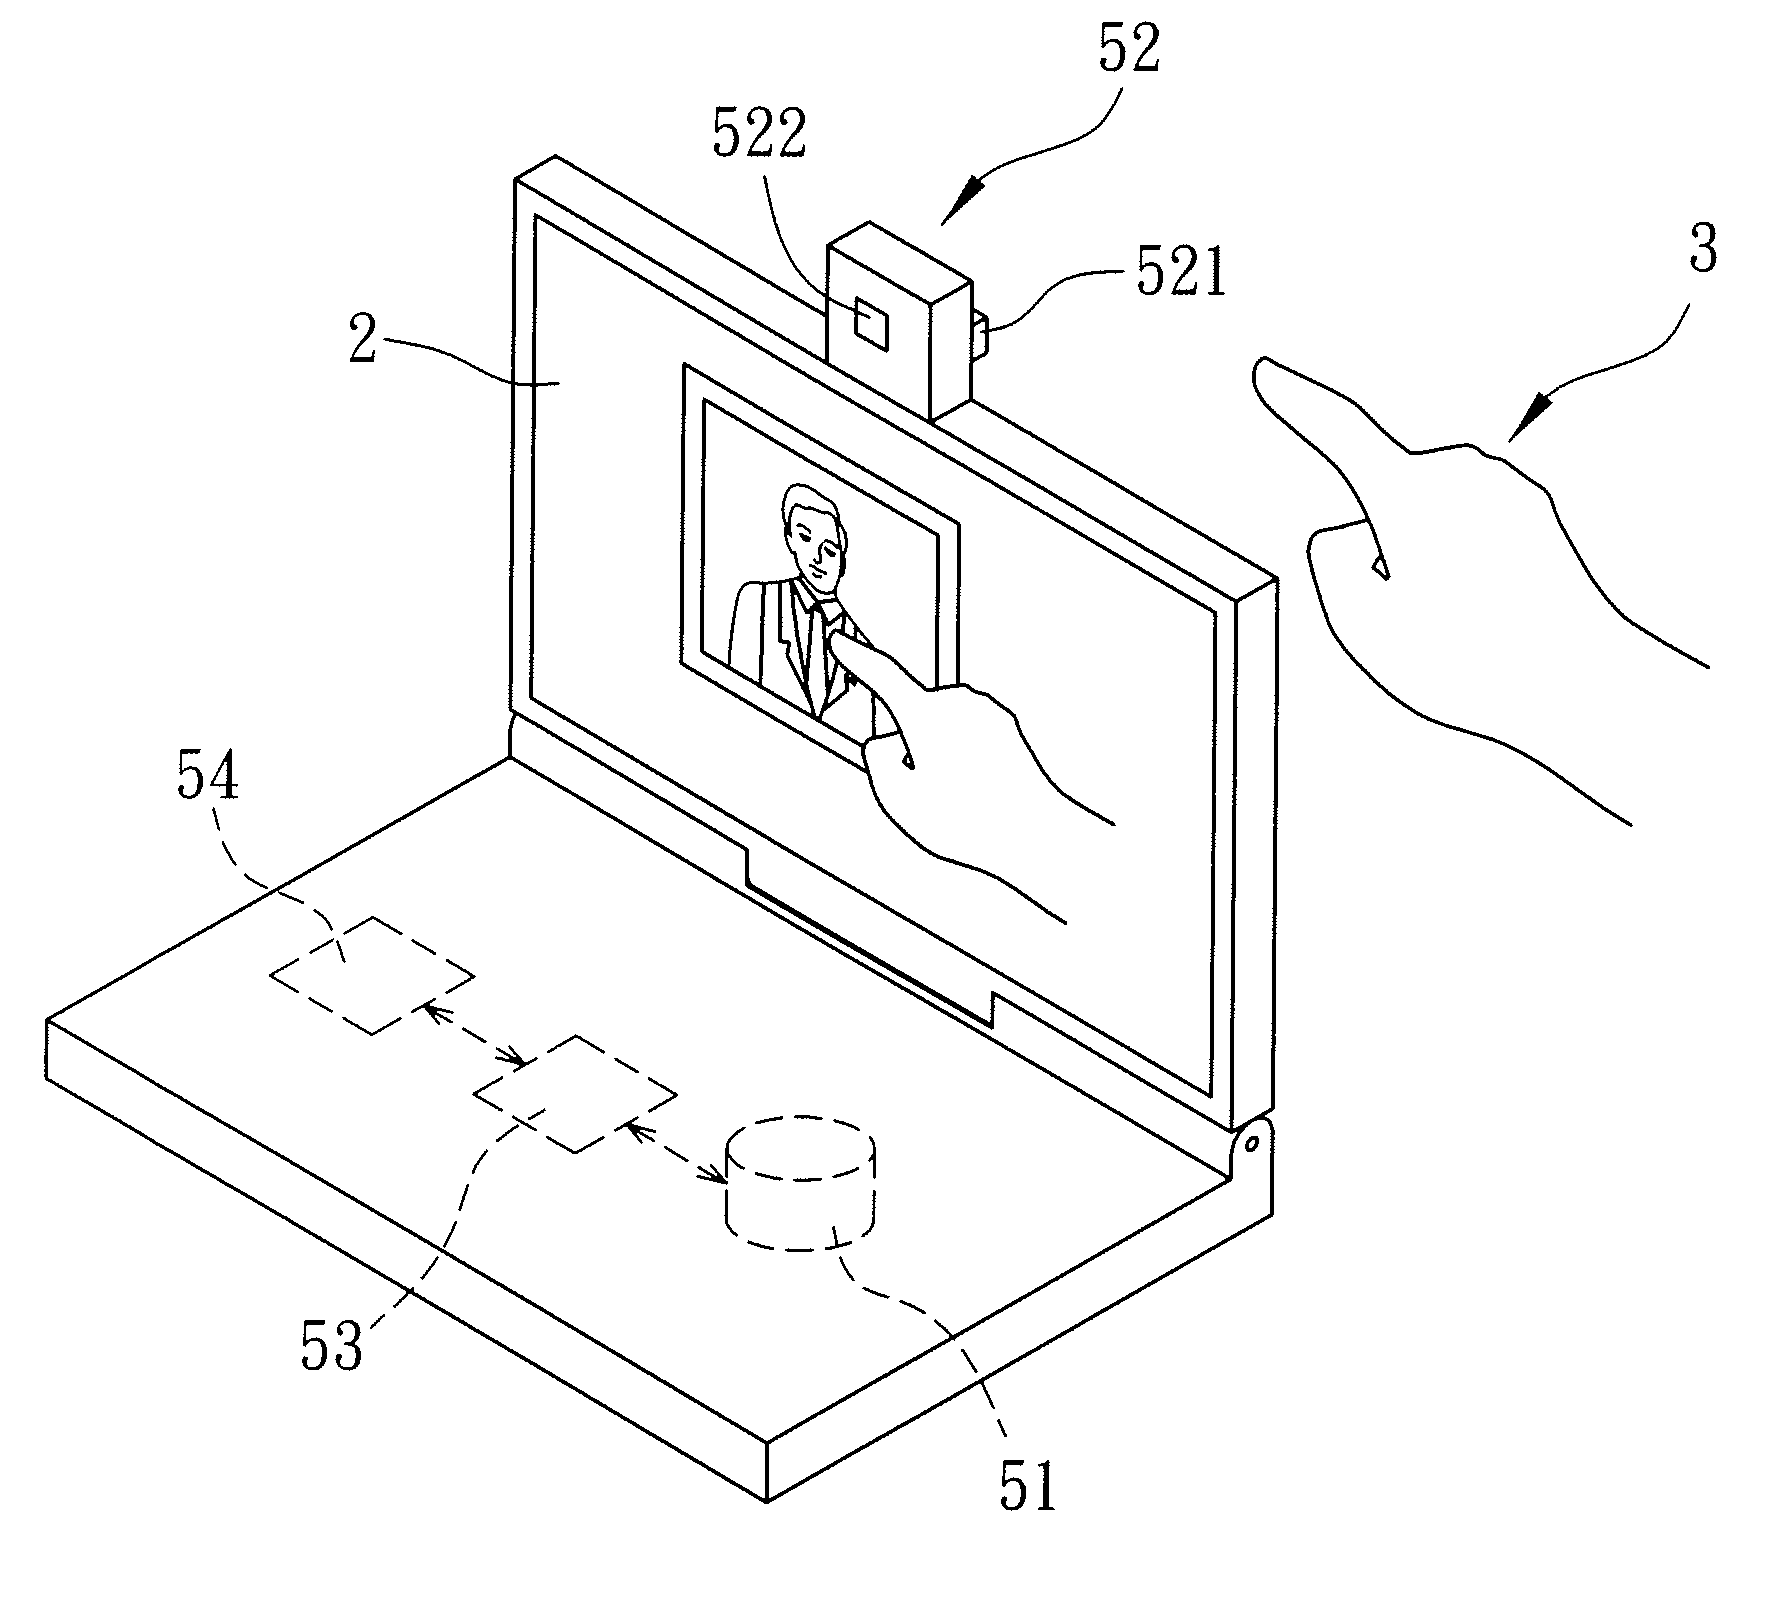 Gesture-based control method for interactive screen control